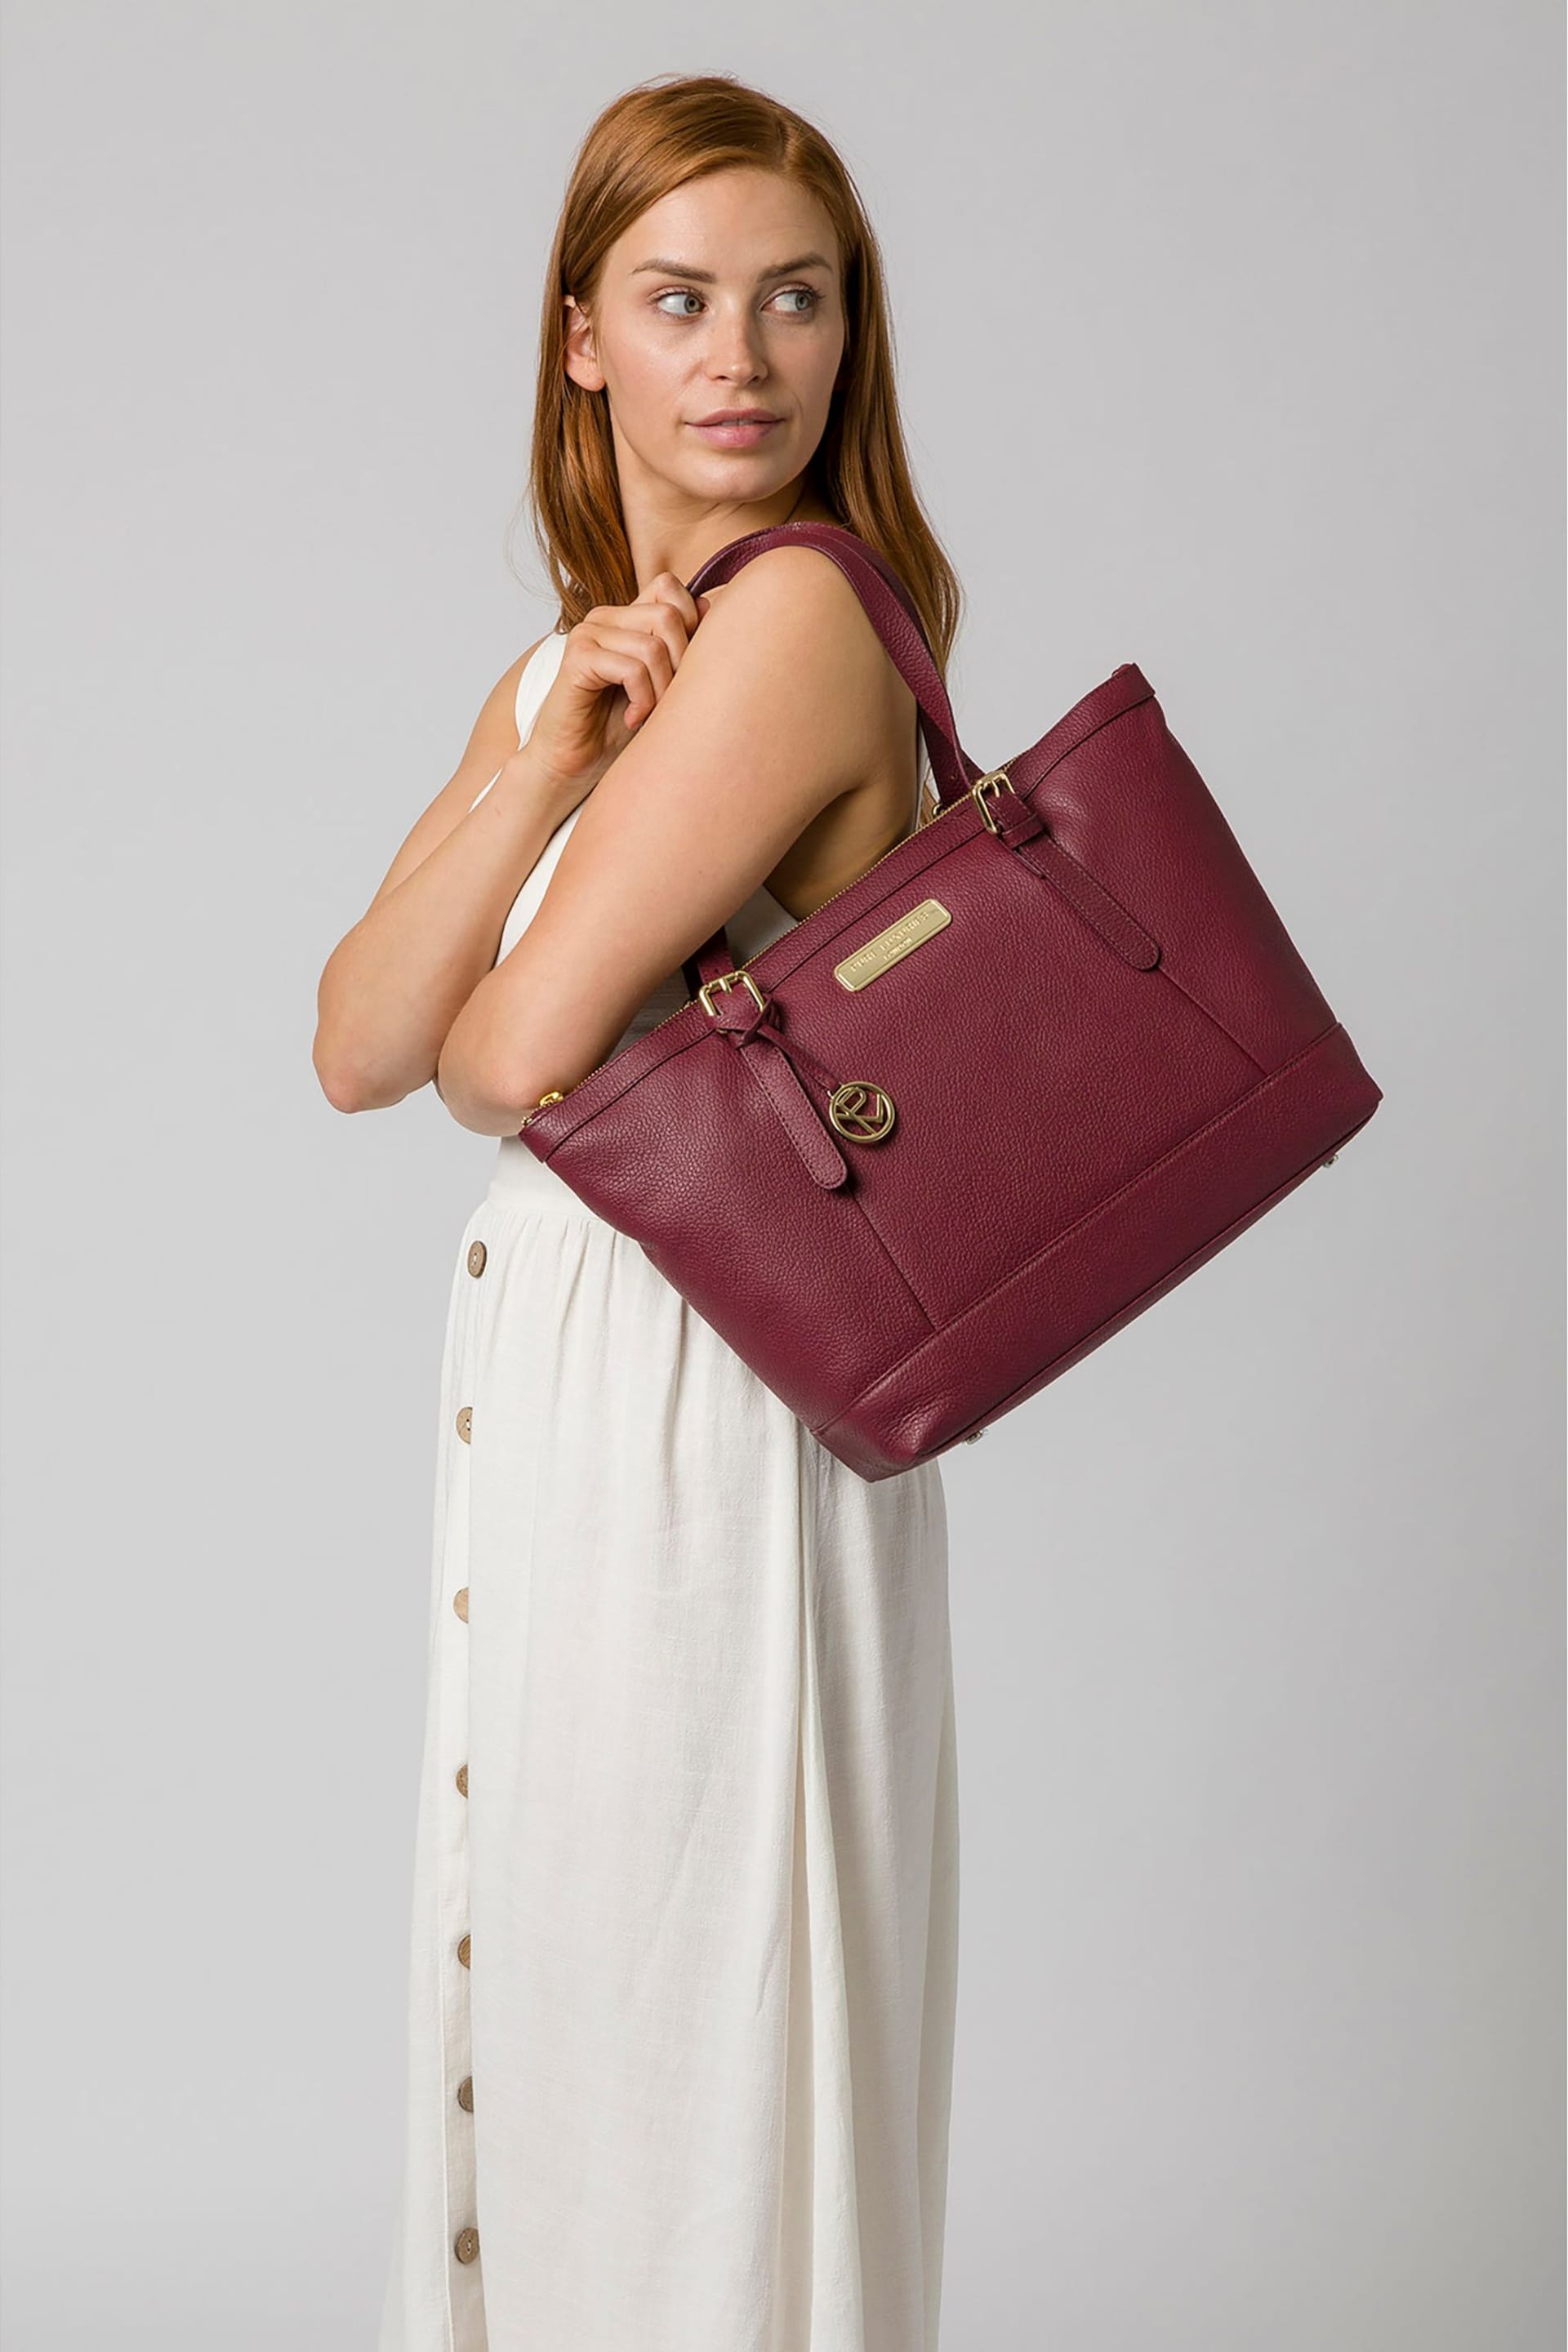 Pure Luxuries London Emily Leather Tote Bag - Image 5 of 5